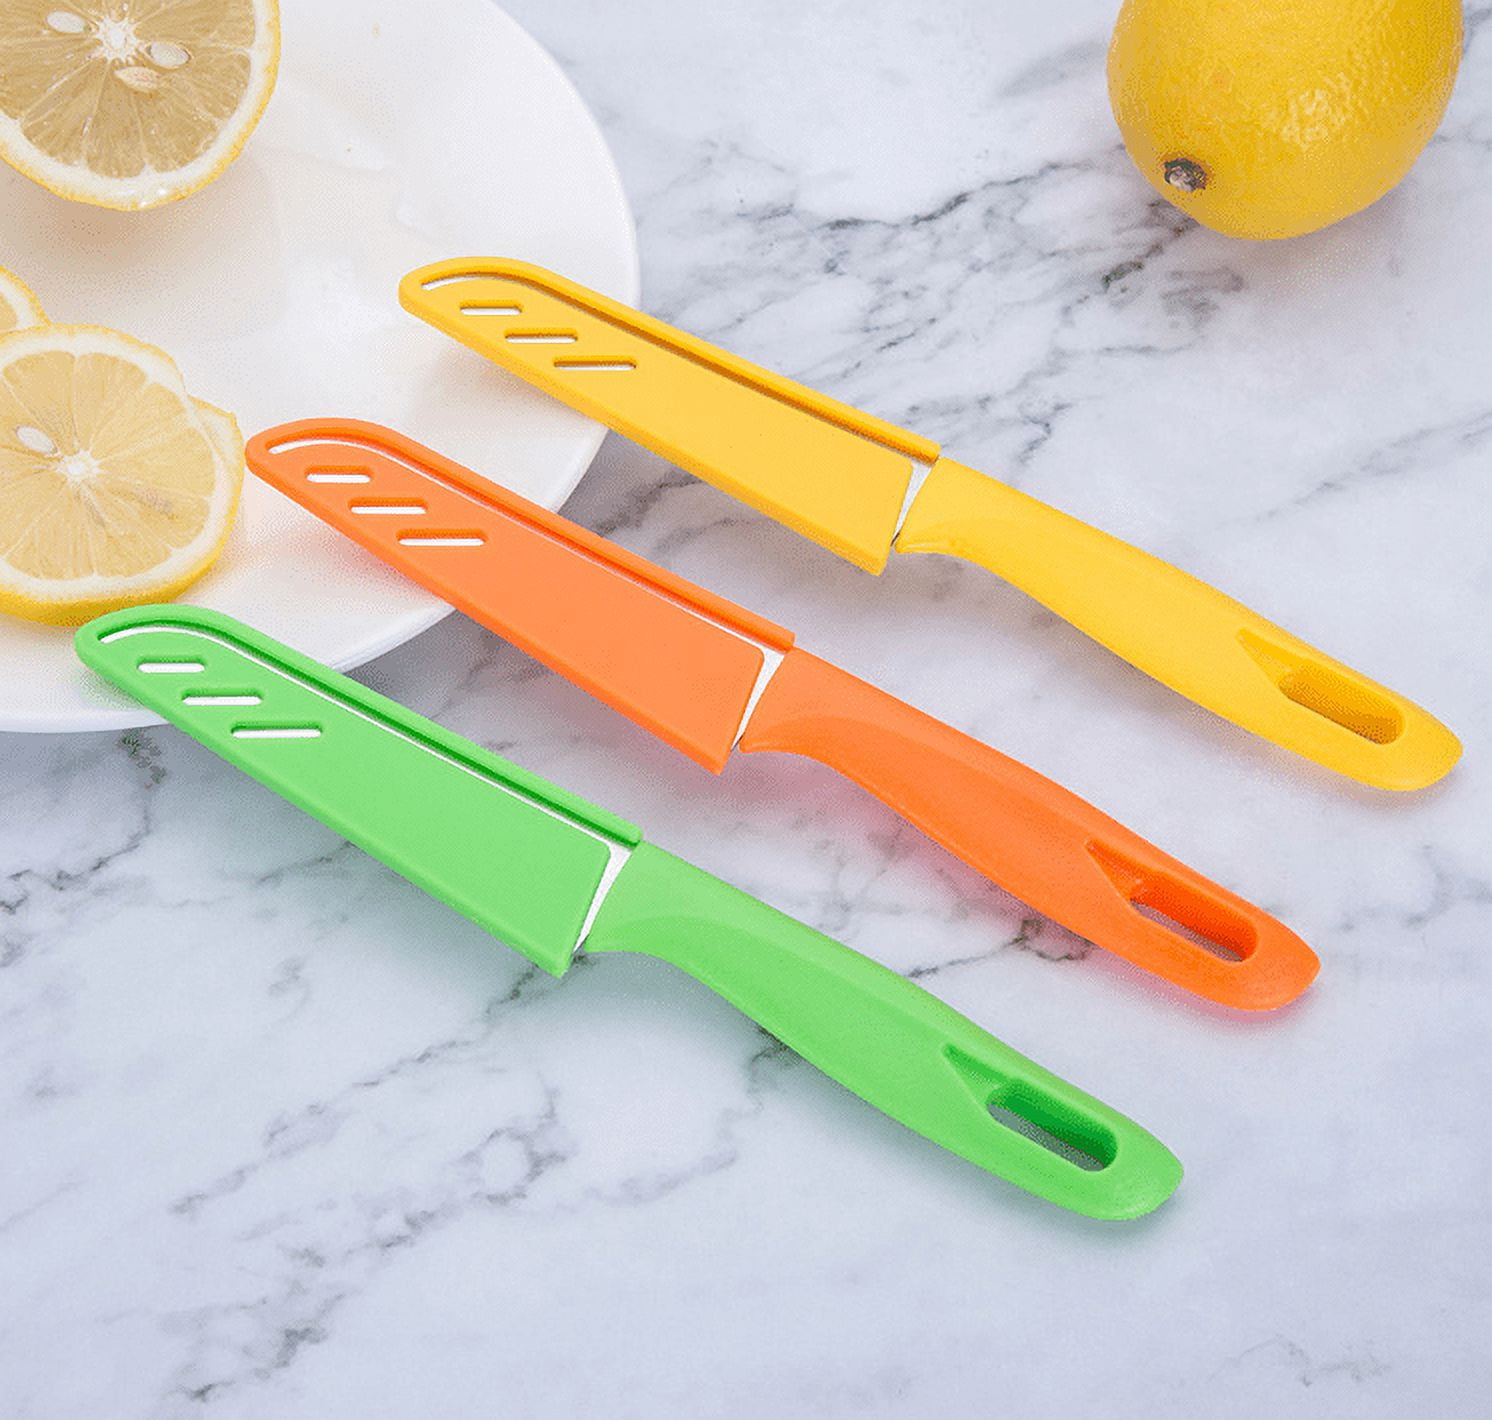 Magiware Paring Knife, 8PCS Paring Knife Set with Cover, Small Kitchen  Vegetable Fruit Knives, 3.5 Inch Ultra Sharp PP Handle